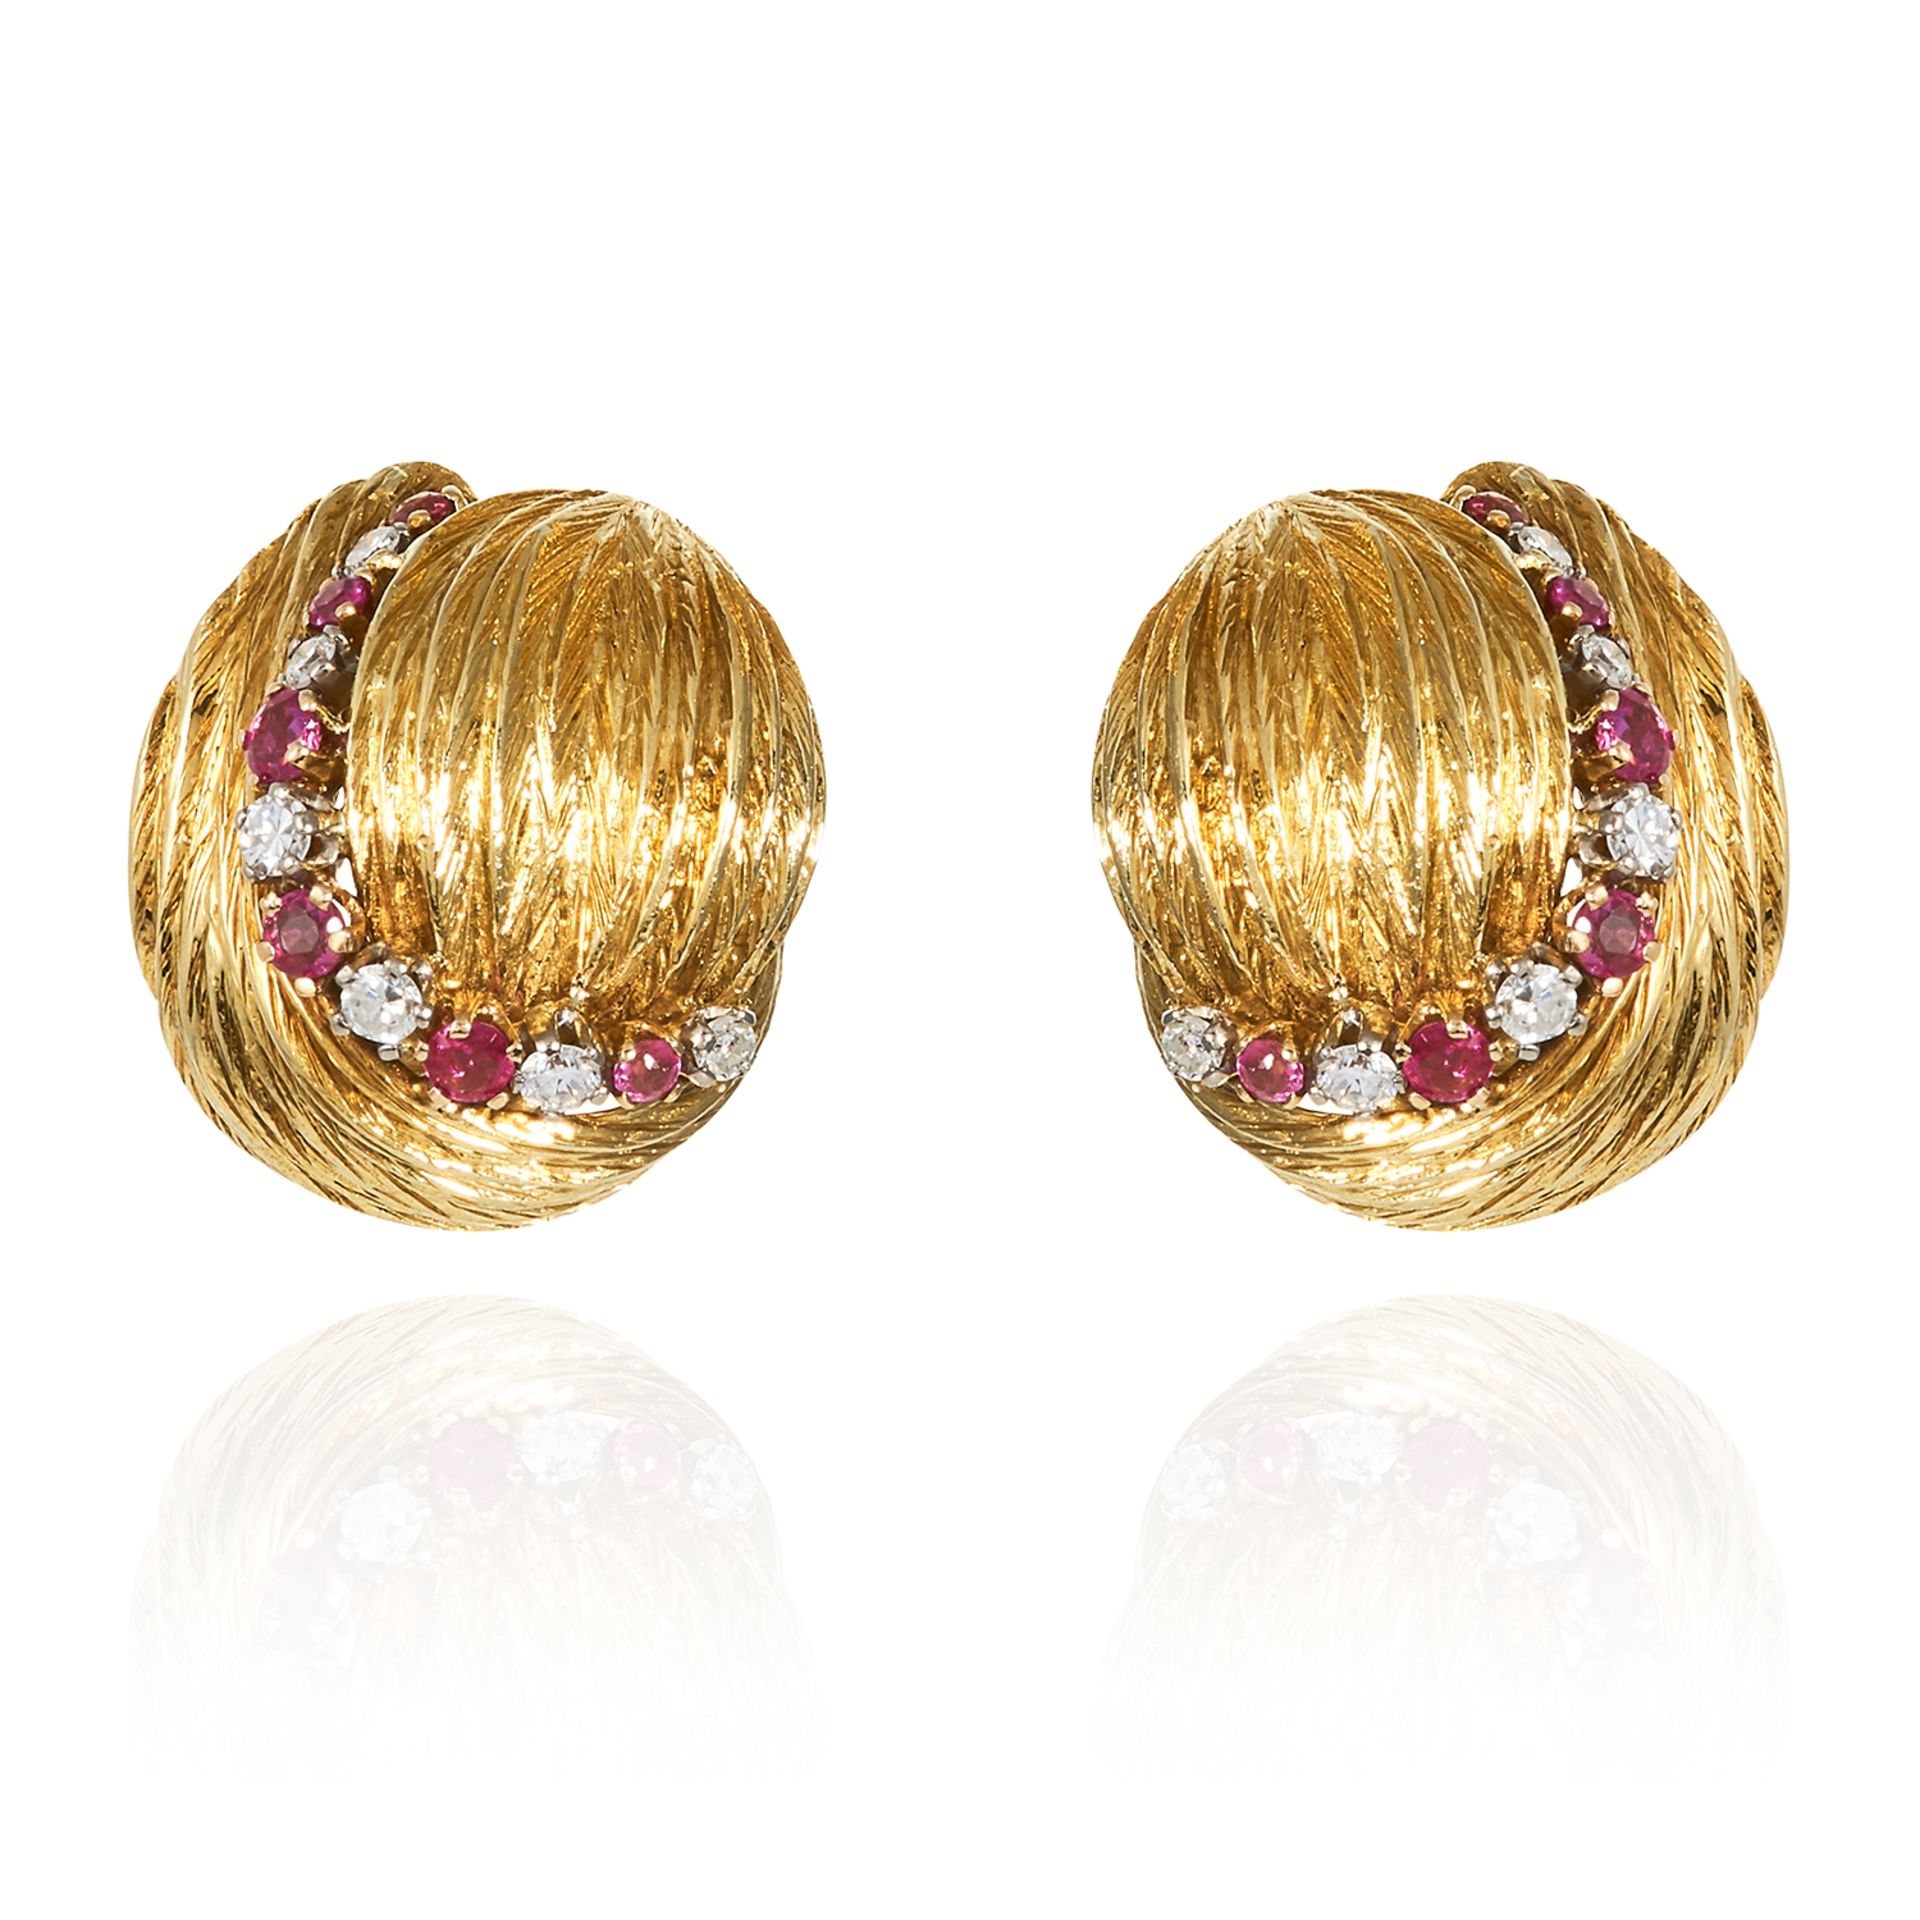 A PAIR OF VINTAGE RUBY AND DIAMOND EARRINGS in 18ct yellow gold, jewelled with alternating round cut